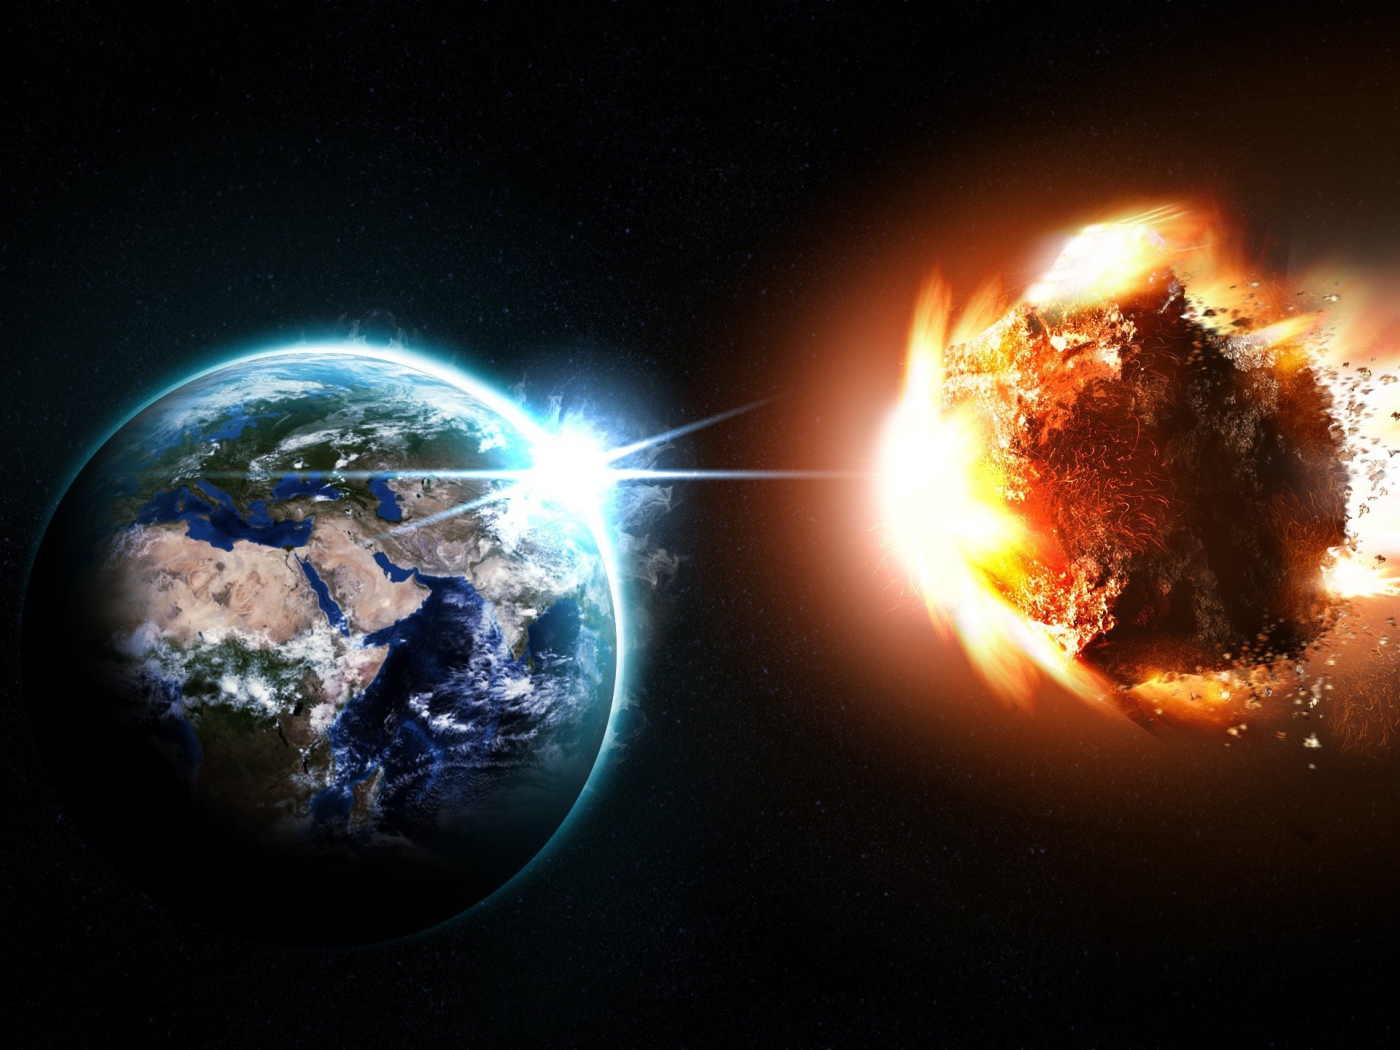 Fire asteroid approaching Earth